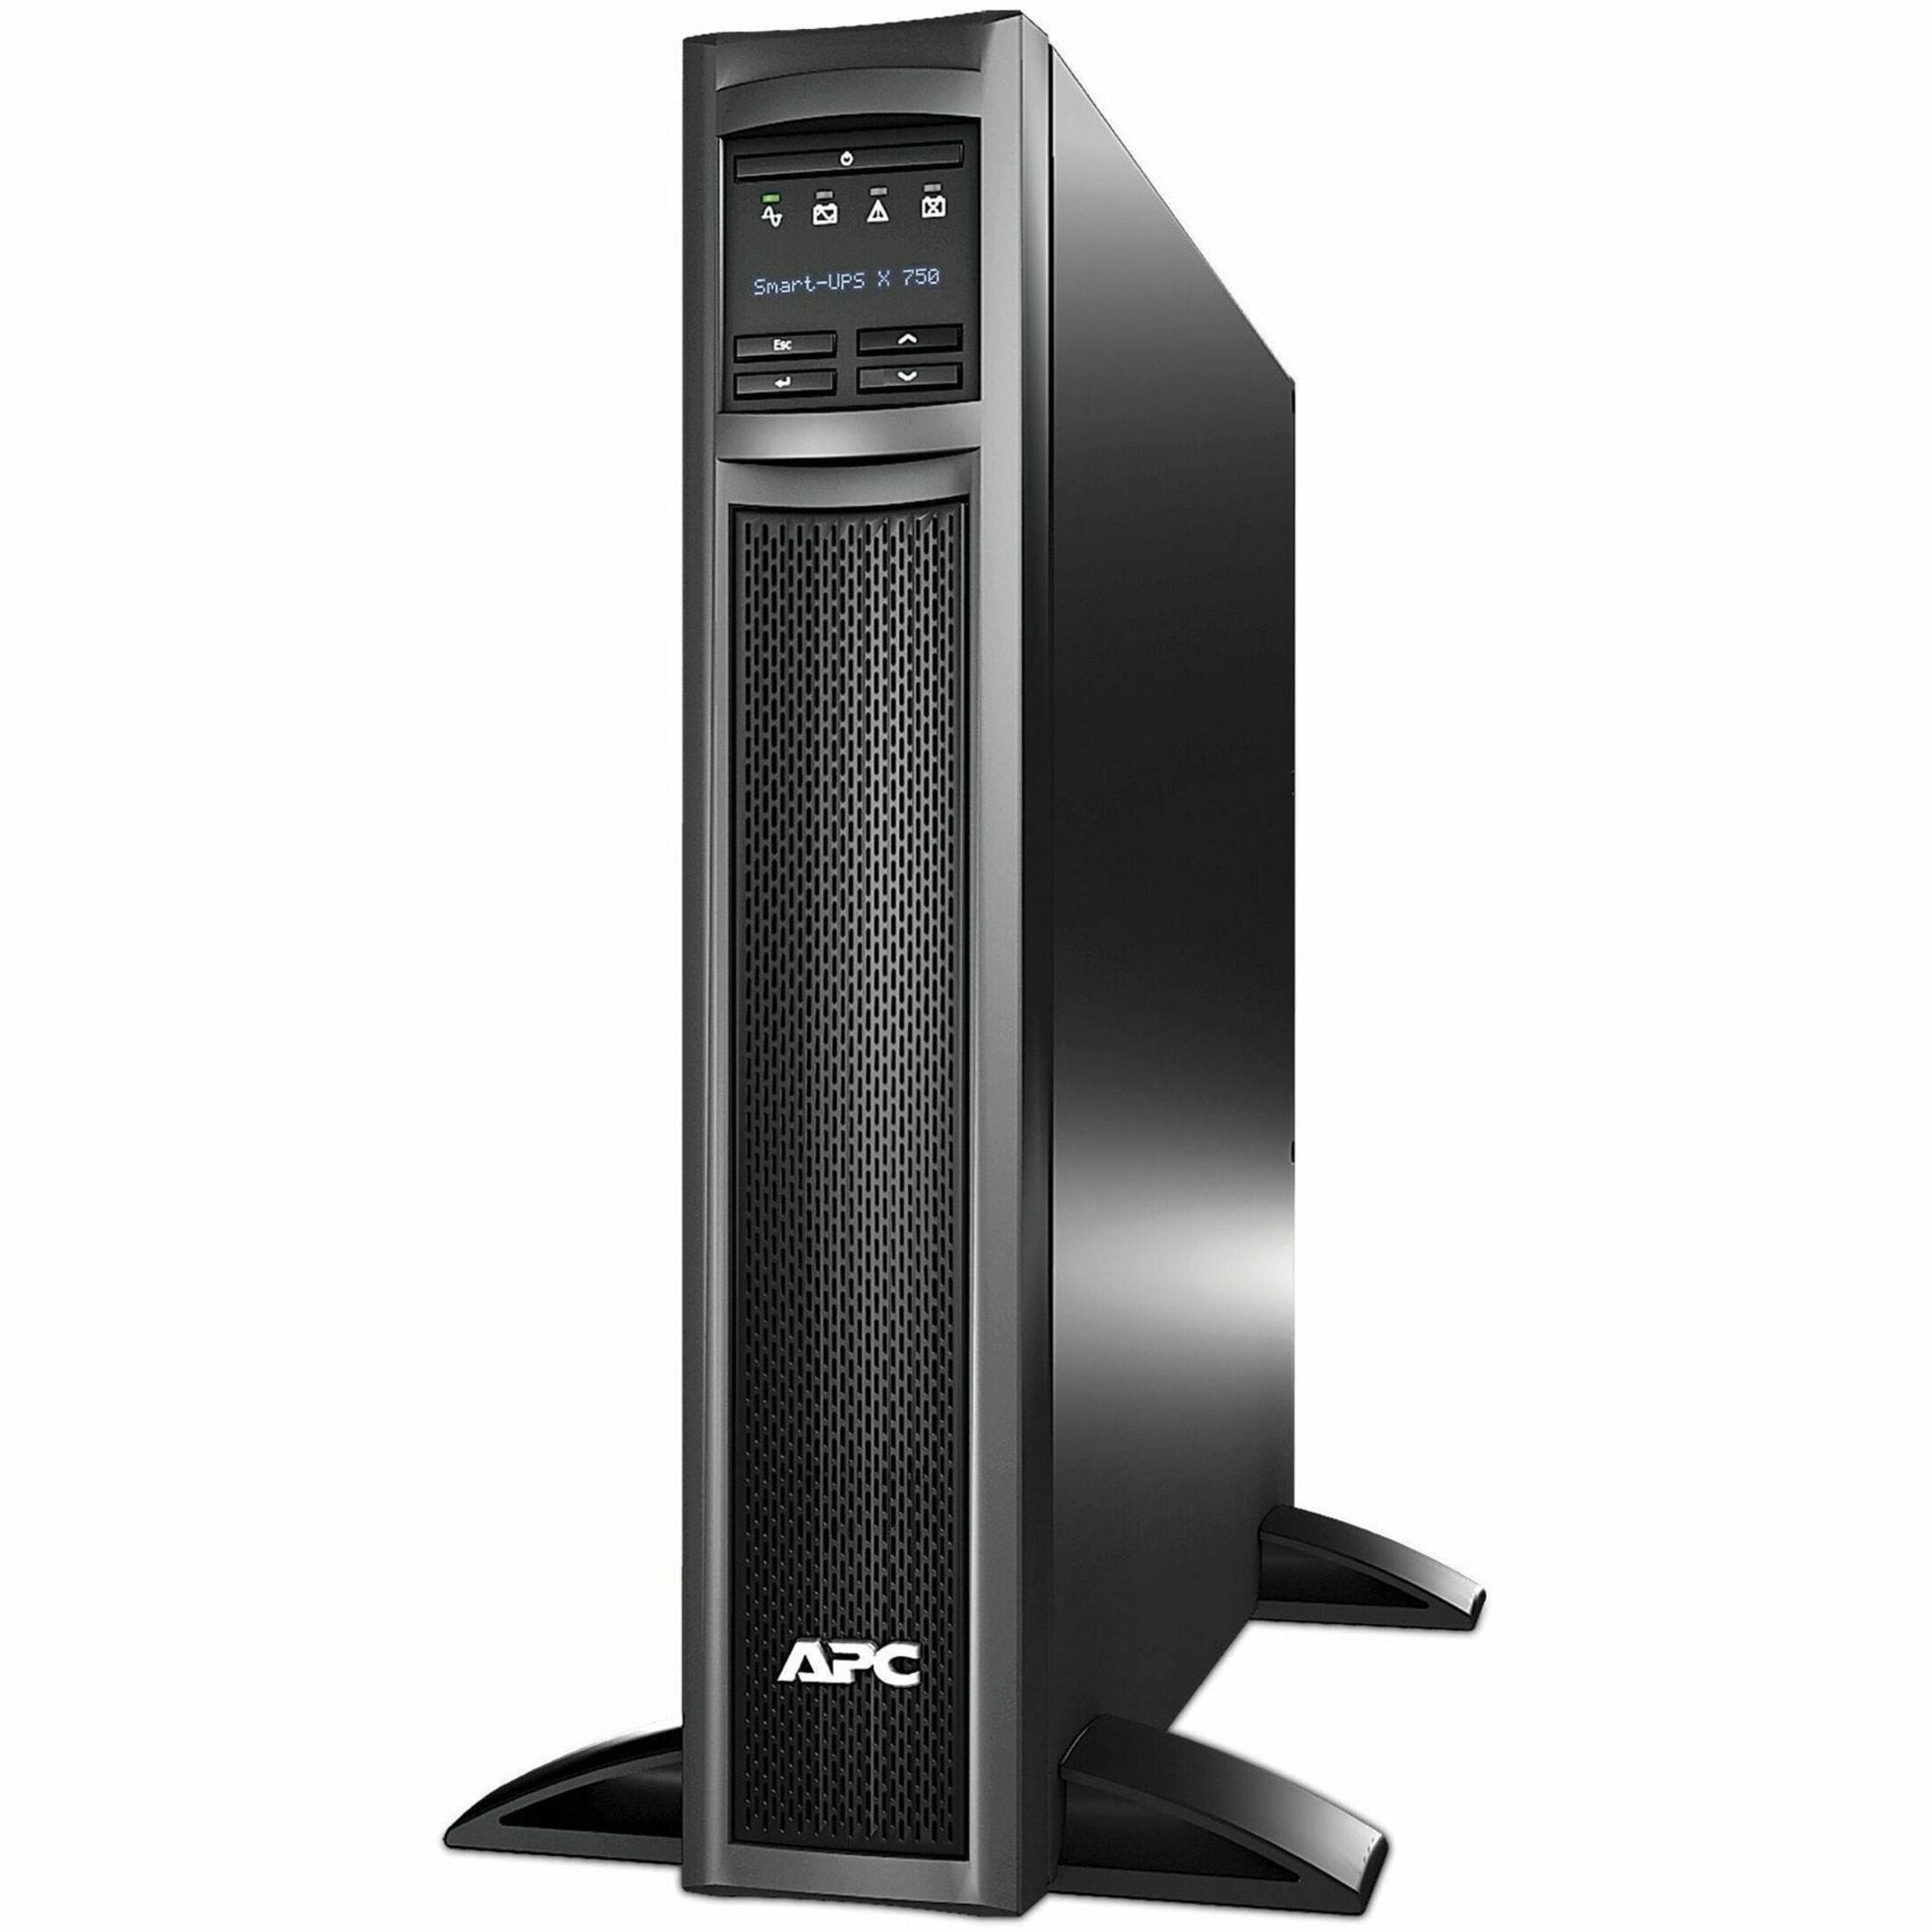 APC SMX750CNC Smart-UPS X 750VA Rack/Tower LCD 120V with Network Card and SmartConnect, Energy Star, 3 Year Warranty